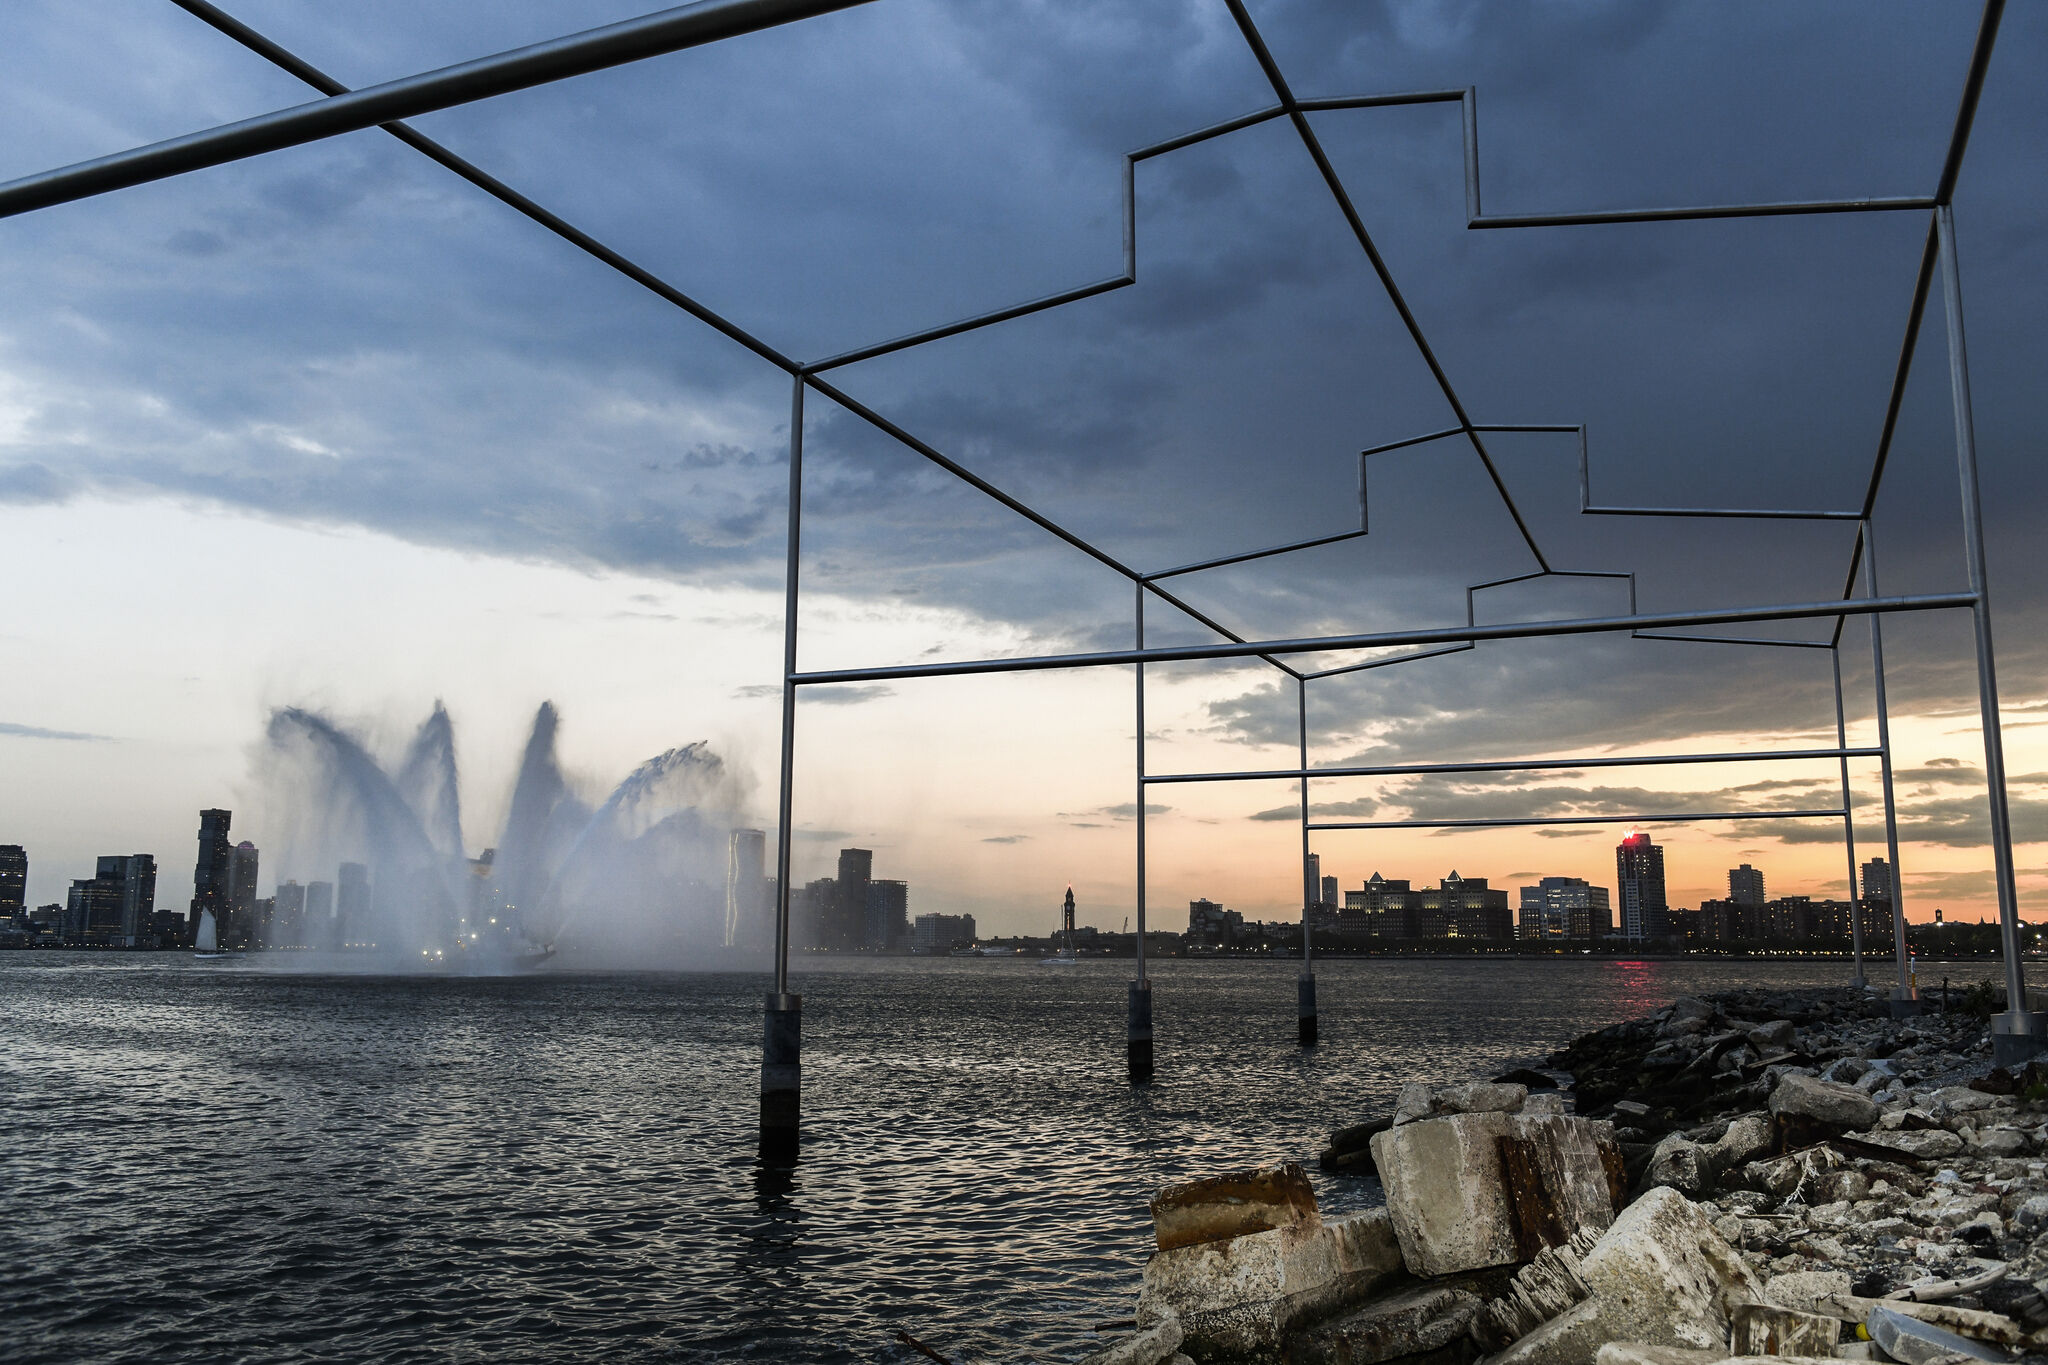 Close-up view of a sculpture shaped like the metal outline of a building on the shore of the Hudson River, with the New Jersey skyline visible in the background at sunset, and a fountain-spraying boat in the distance.